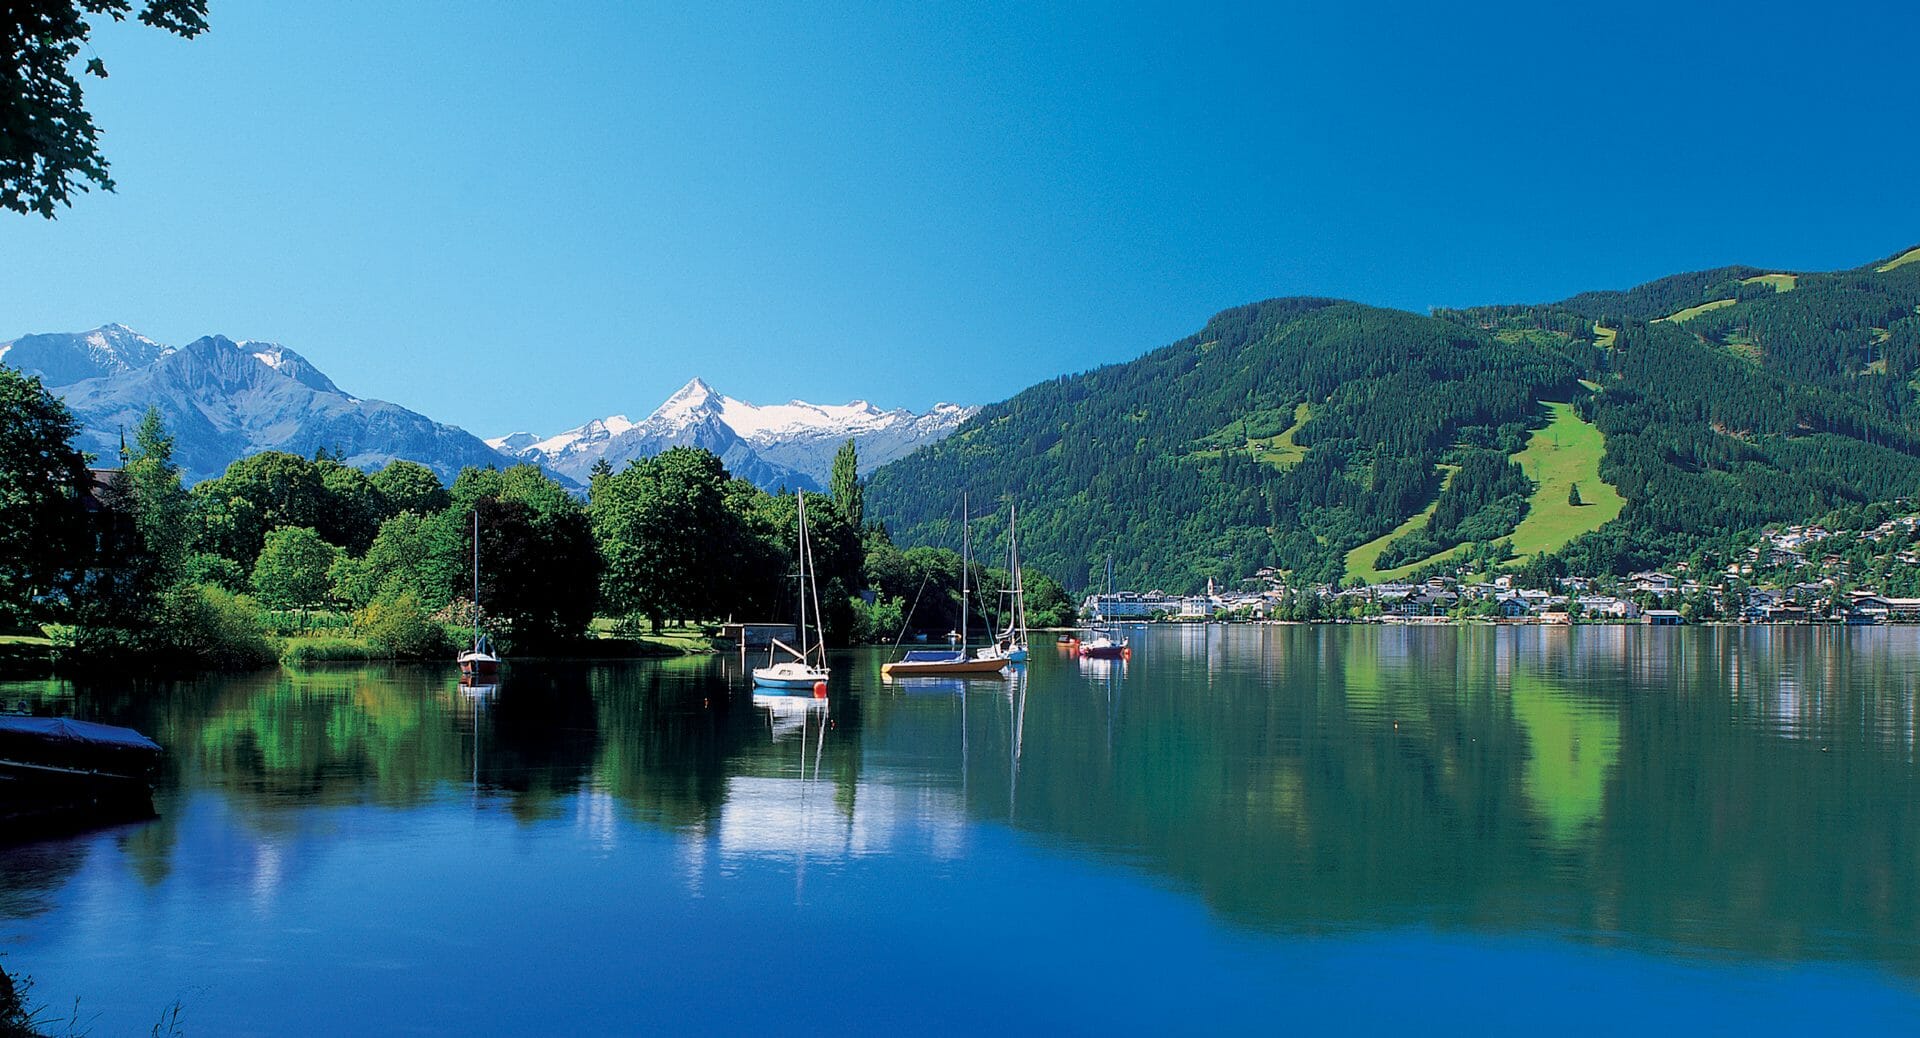  Zell  am  See  holiday options between glaciers mountains 